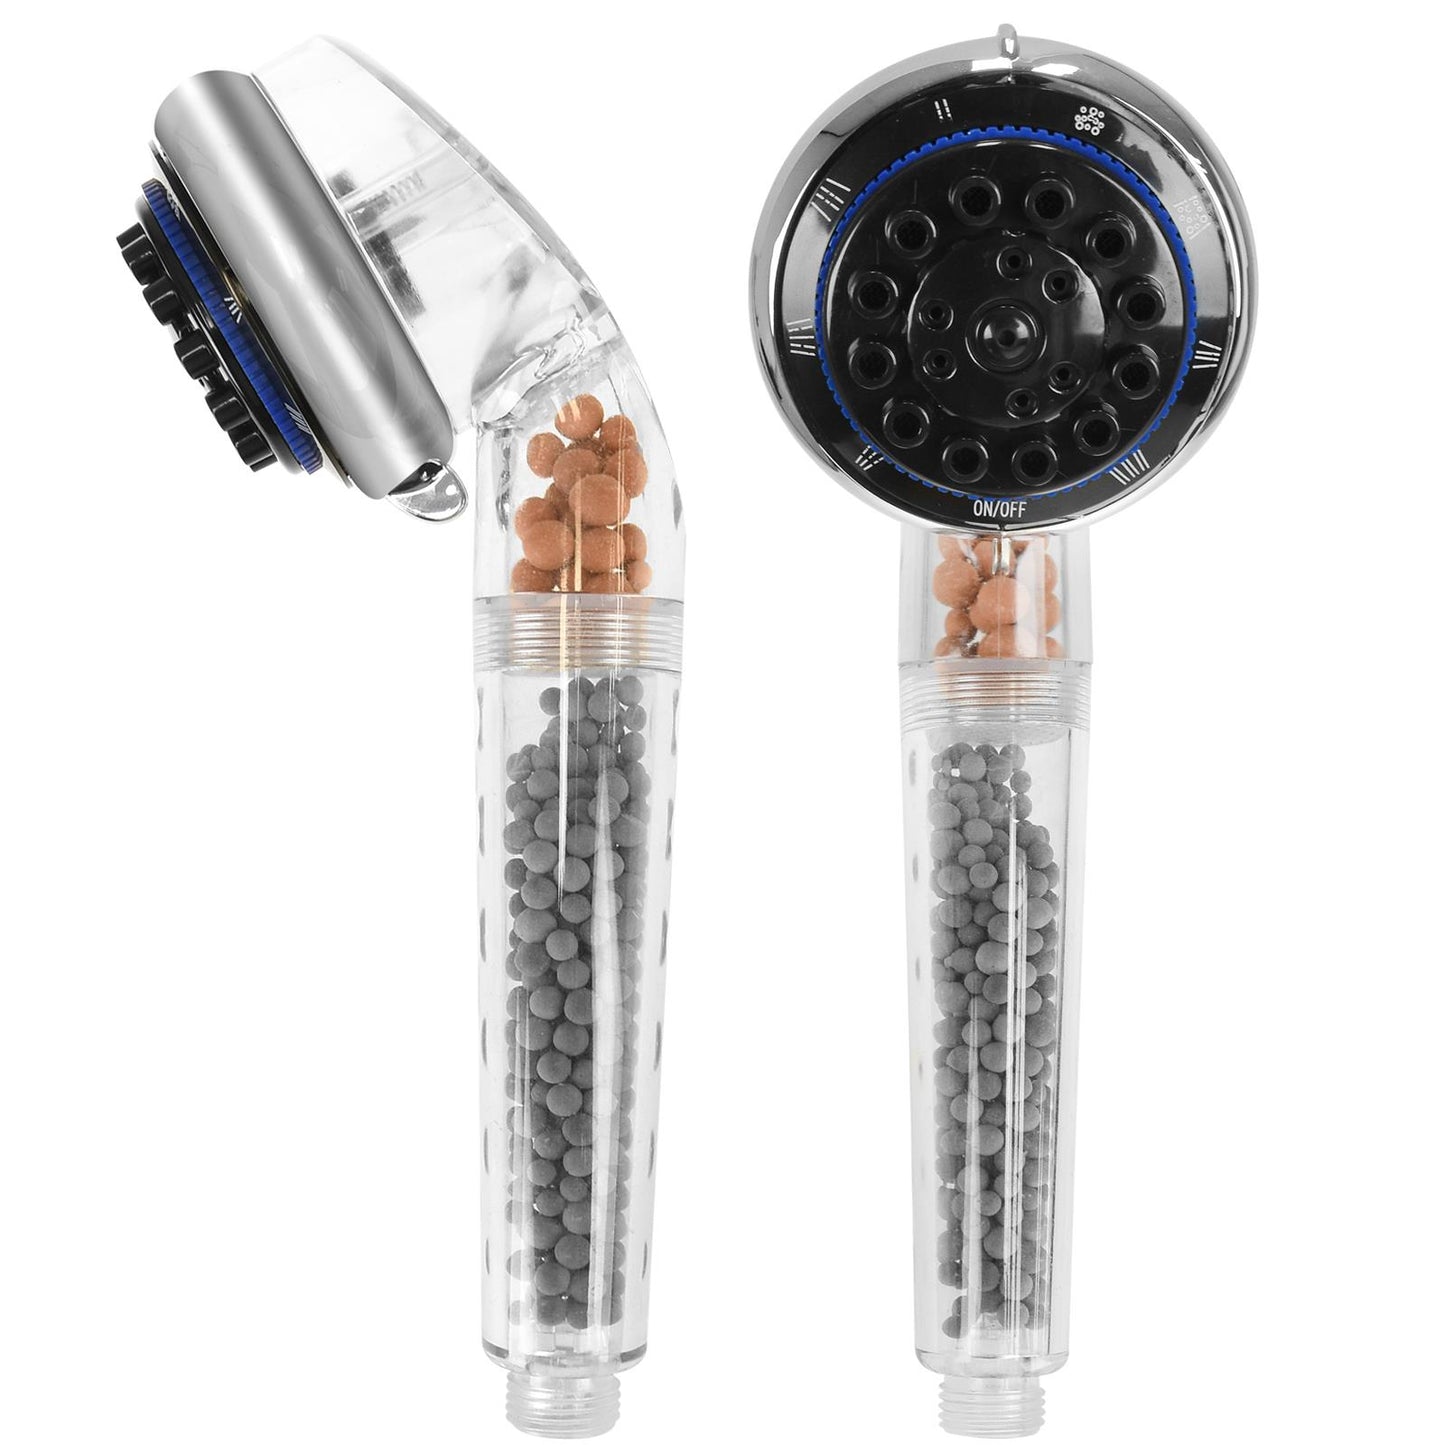 Showerhead With High Pressure And Ionic Filtration System